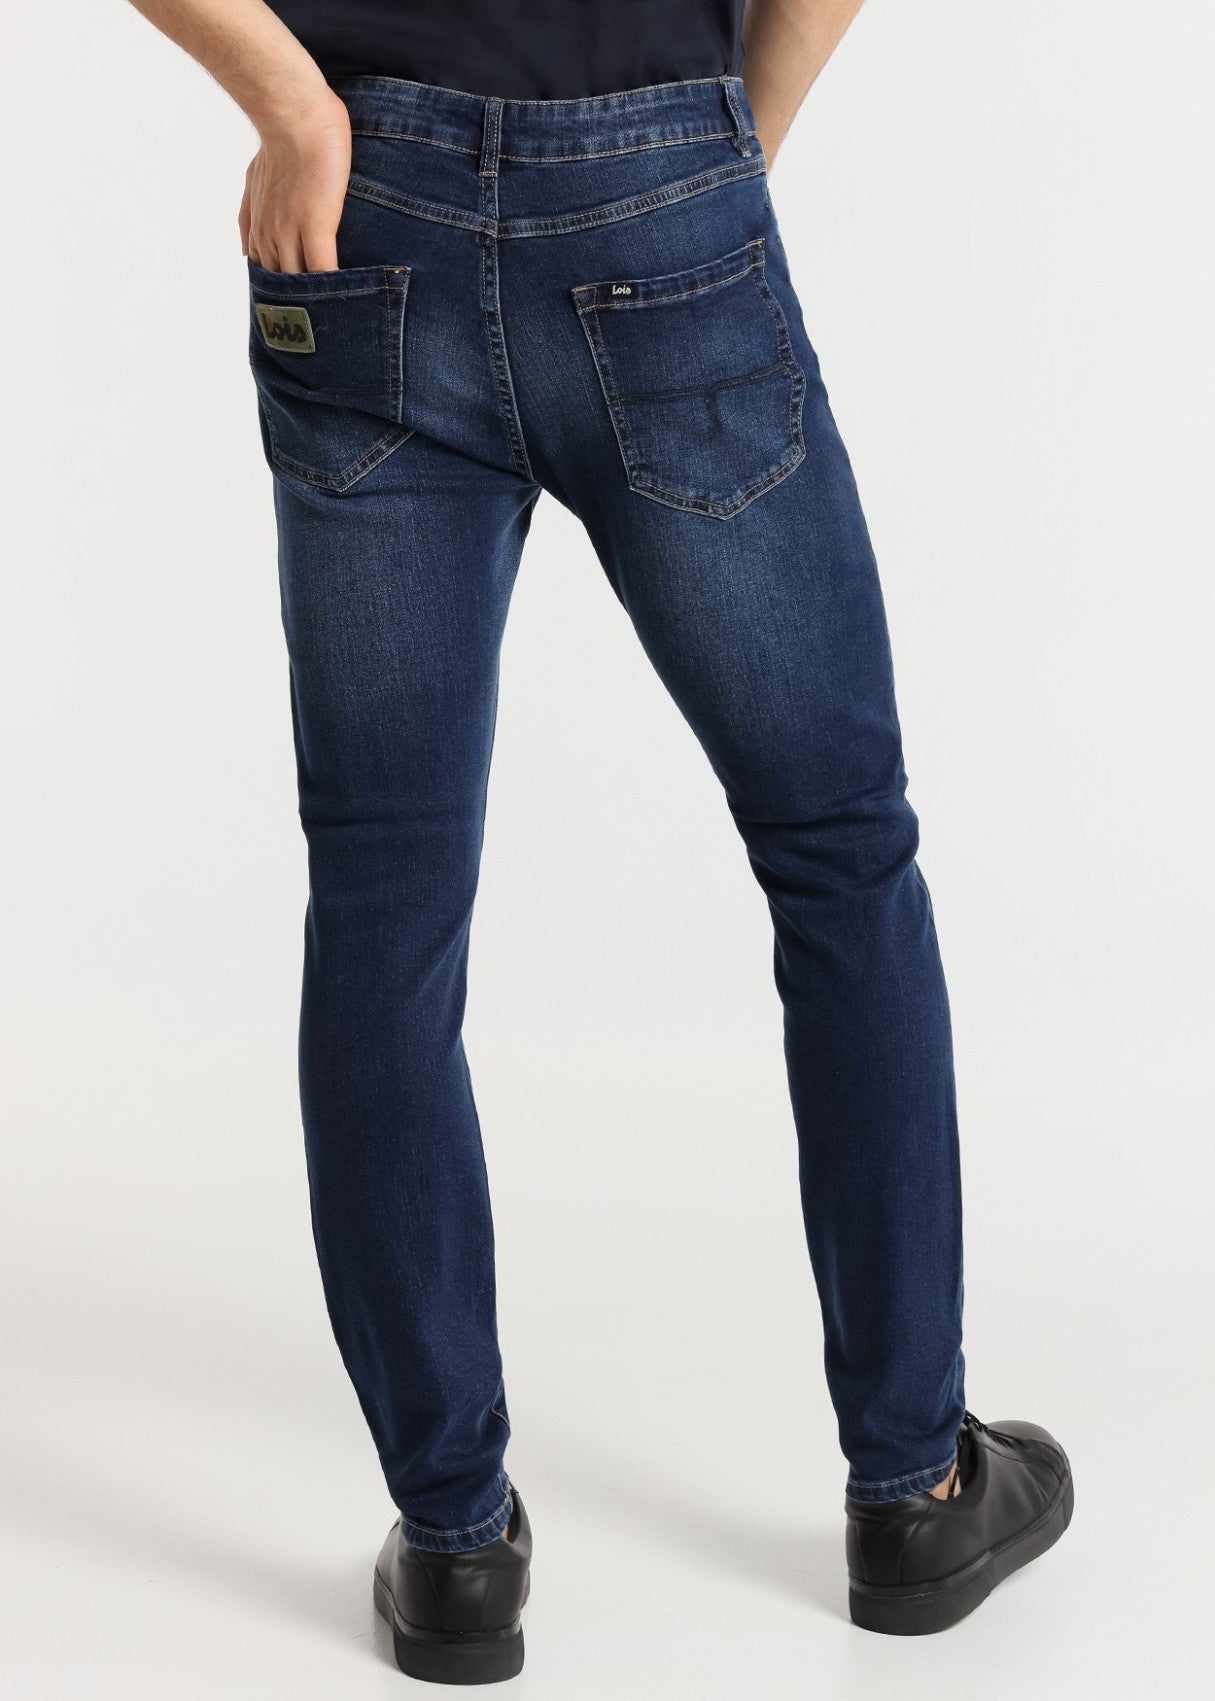 Lois Jeans Lucky Marley Skinny